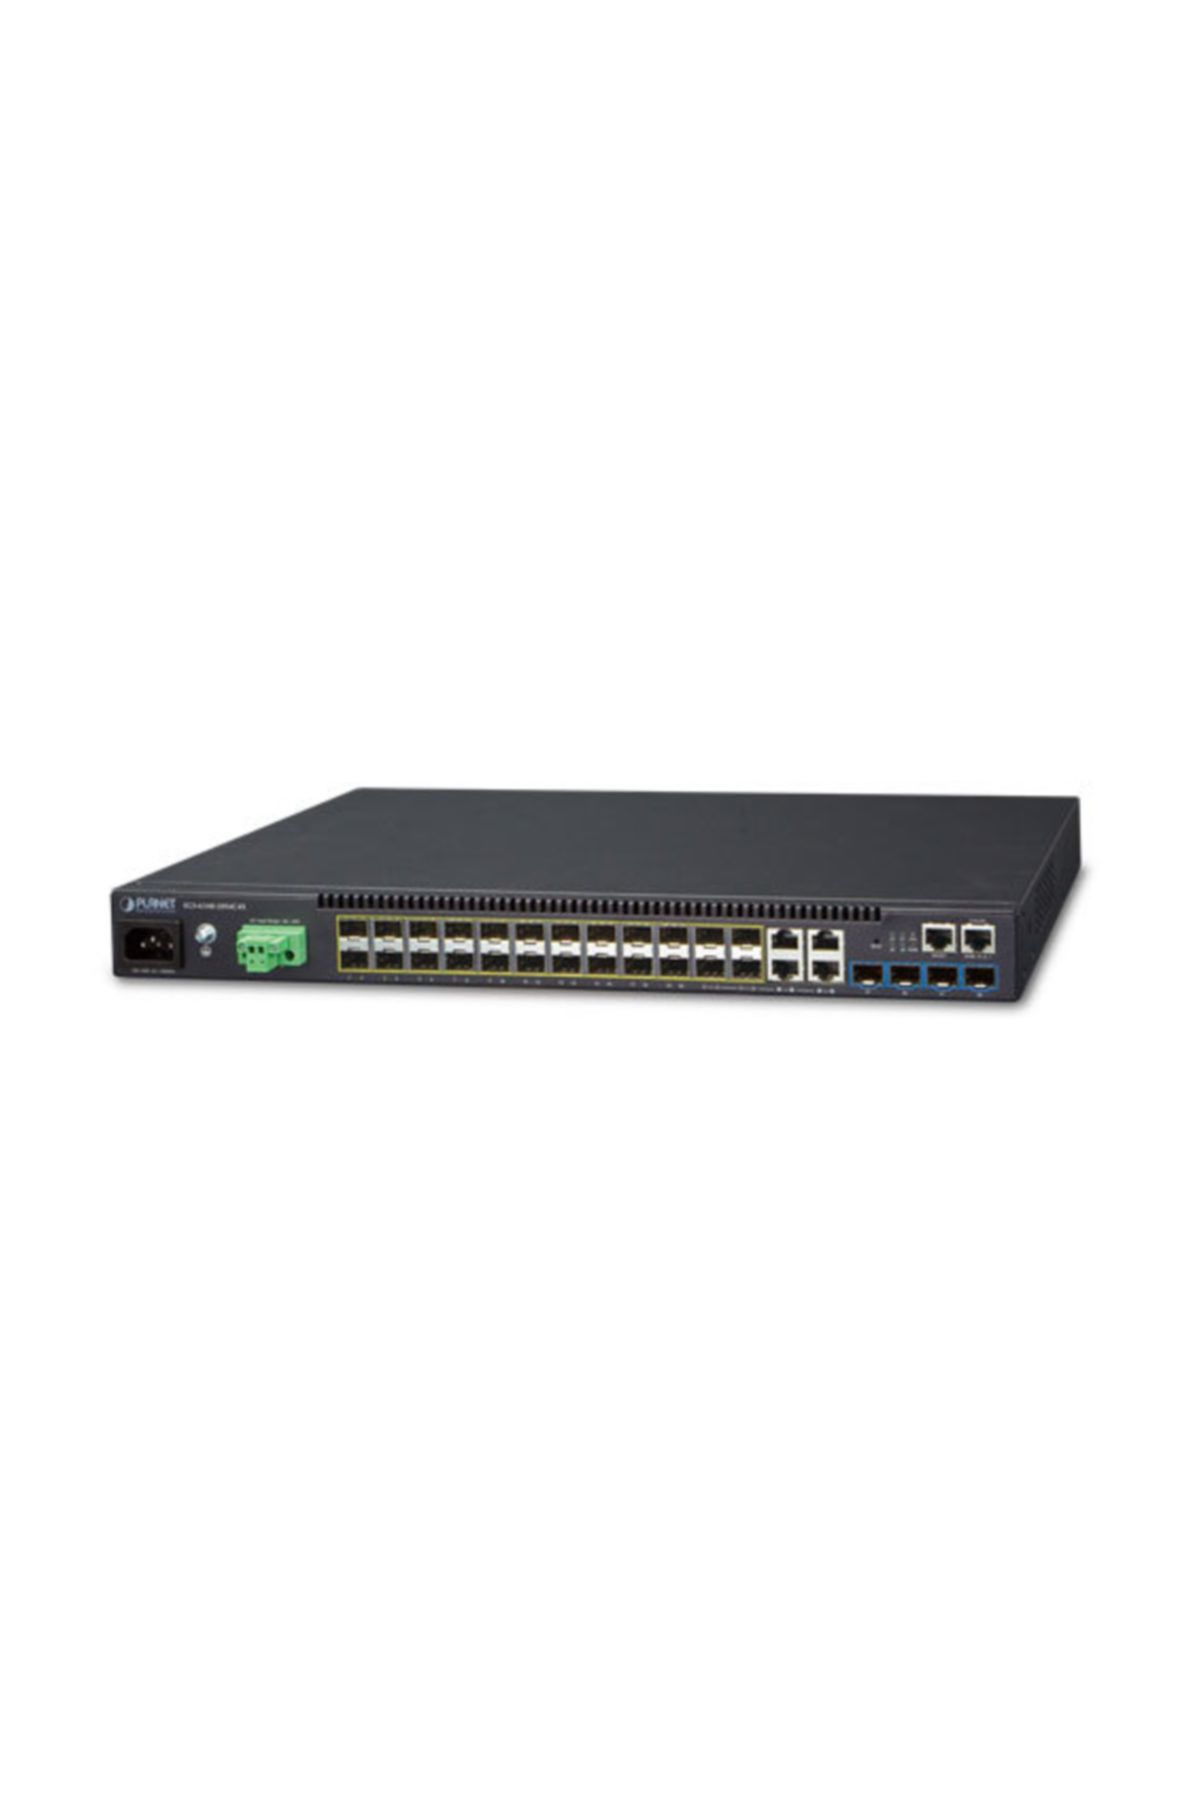 Planet Layer 3 Stackable Managed Switchgt;

20-Port 100/1000X SFP&lt;b 